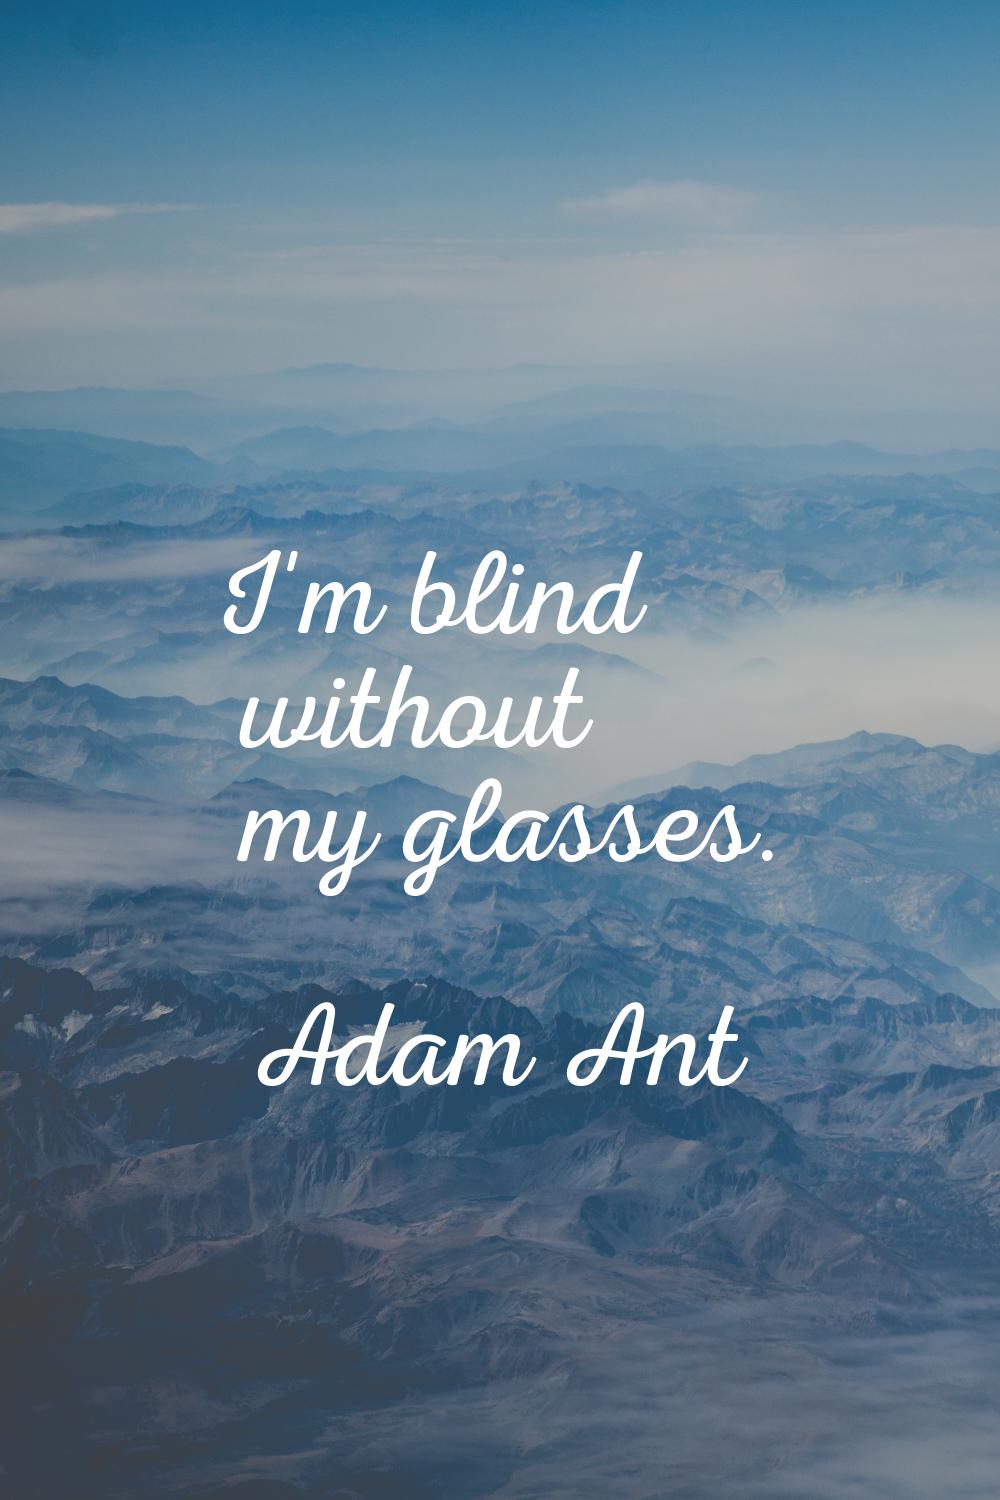 I'm blind without my glasses.